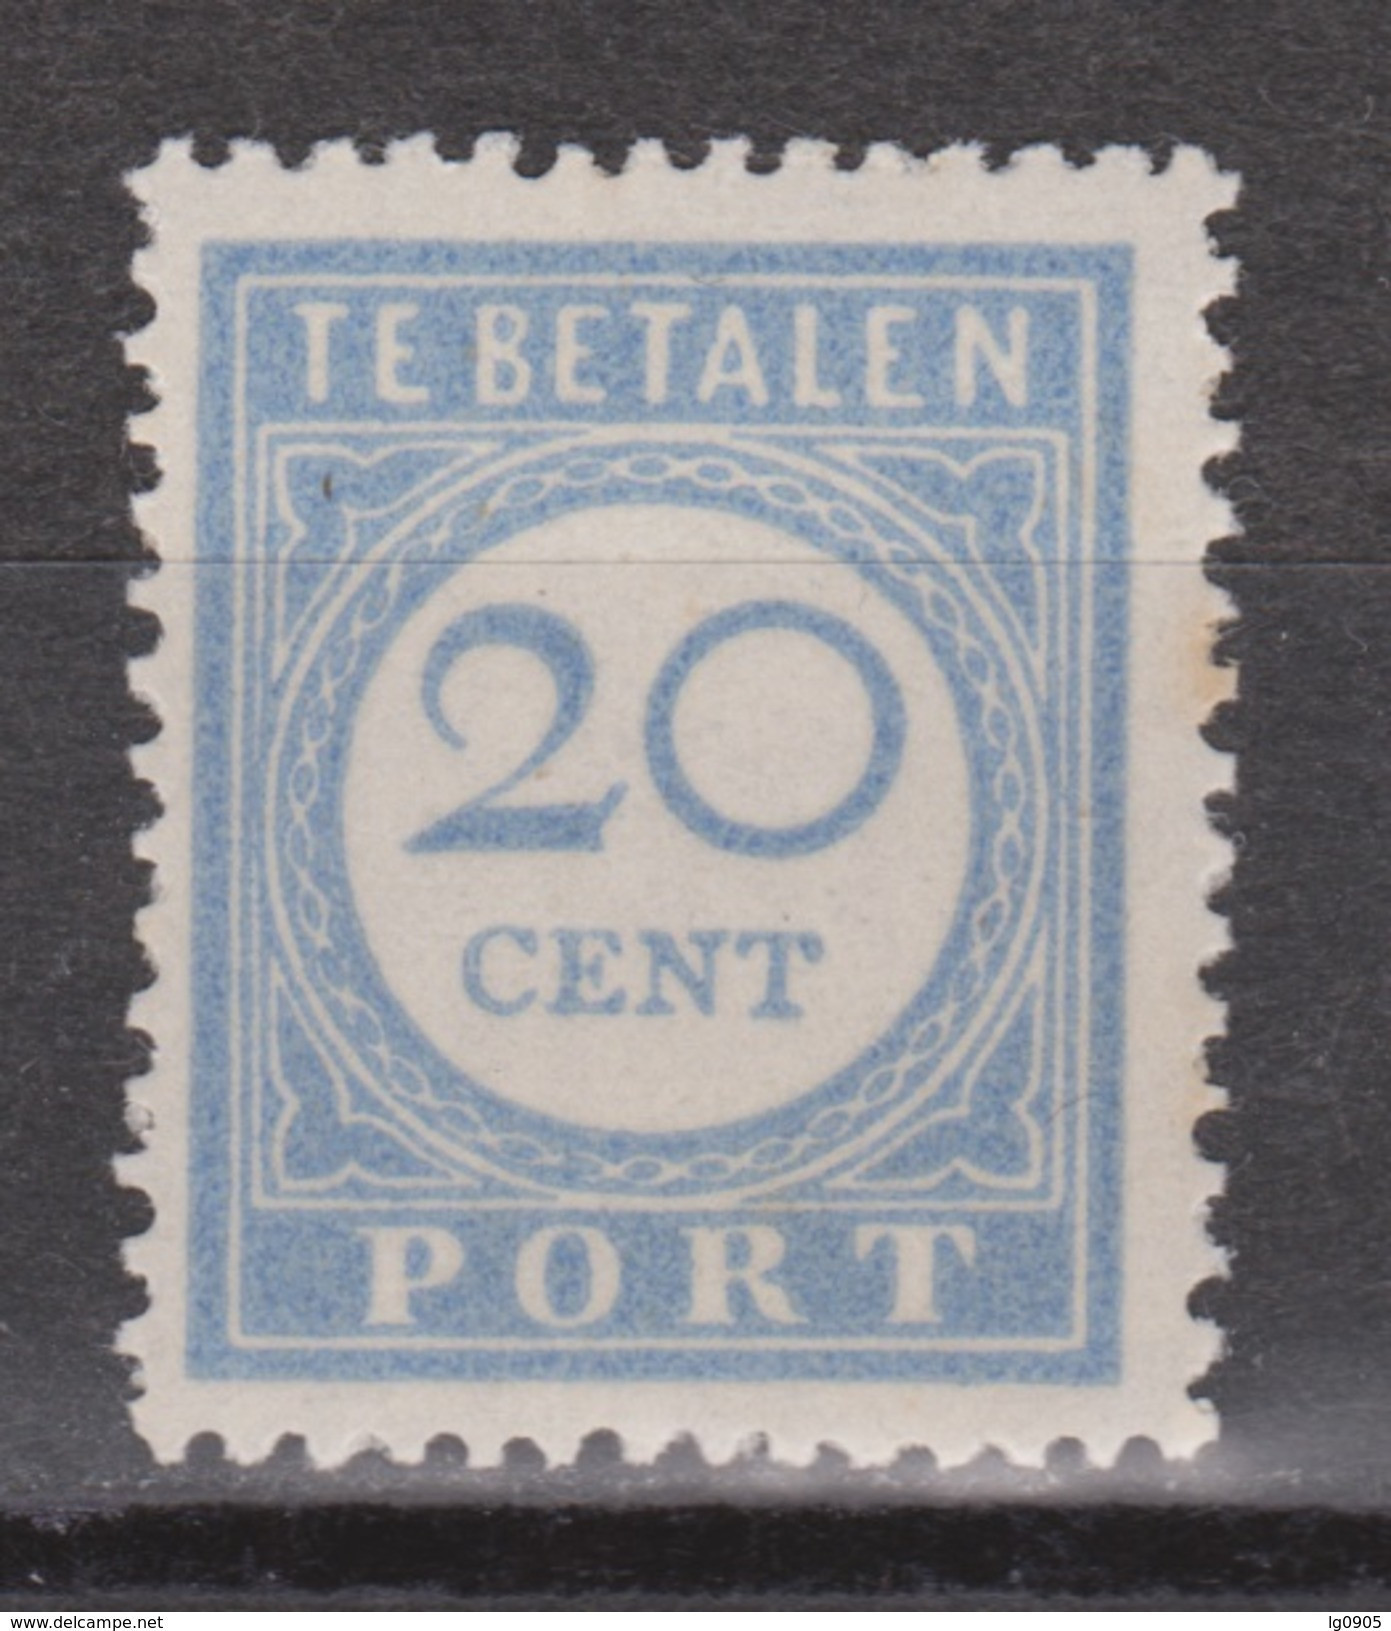 NVPH Nederland Netherlands Holanda Pays Bas Port 58 MLH Timbre-taxe Postmarke Sellos De Correos NOW MANY DUE STAMPS - Tasse